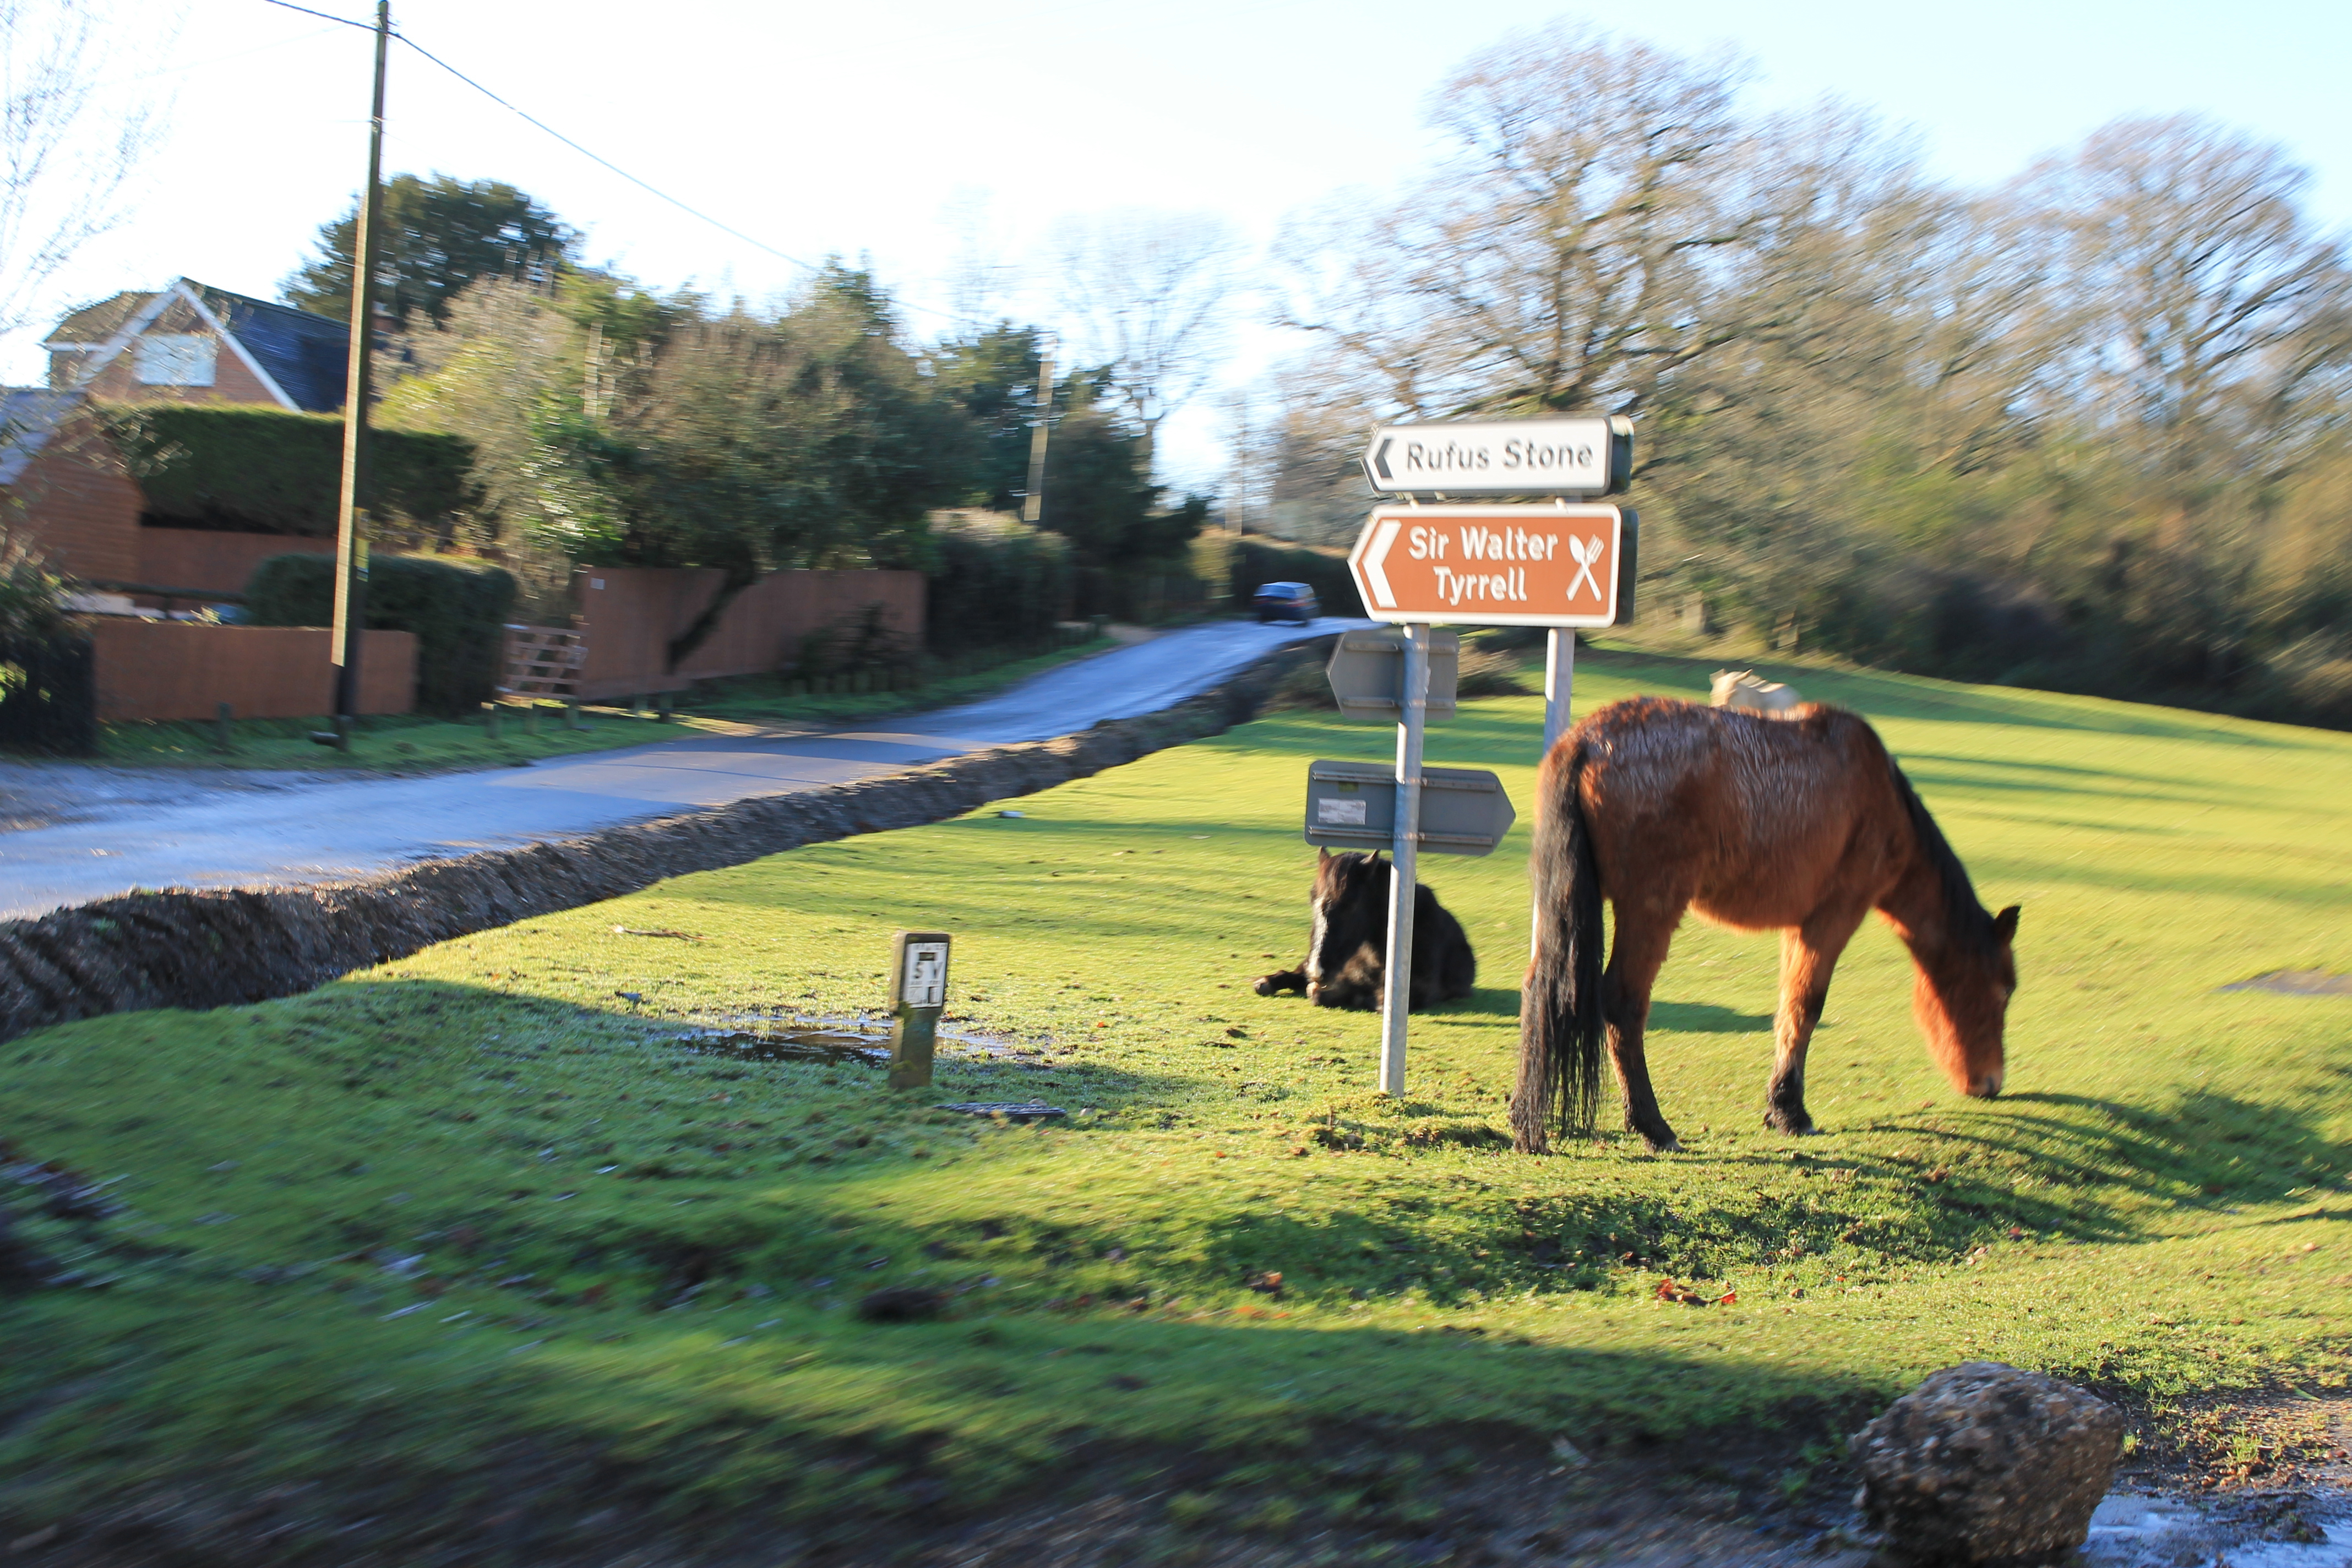 The New Forest ponies are free to roam and like other travellers use the roads to get from A to B.